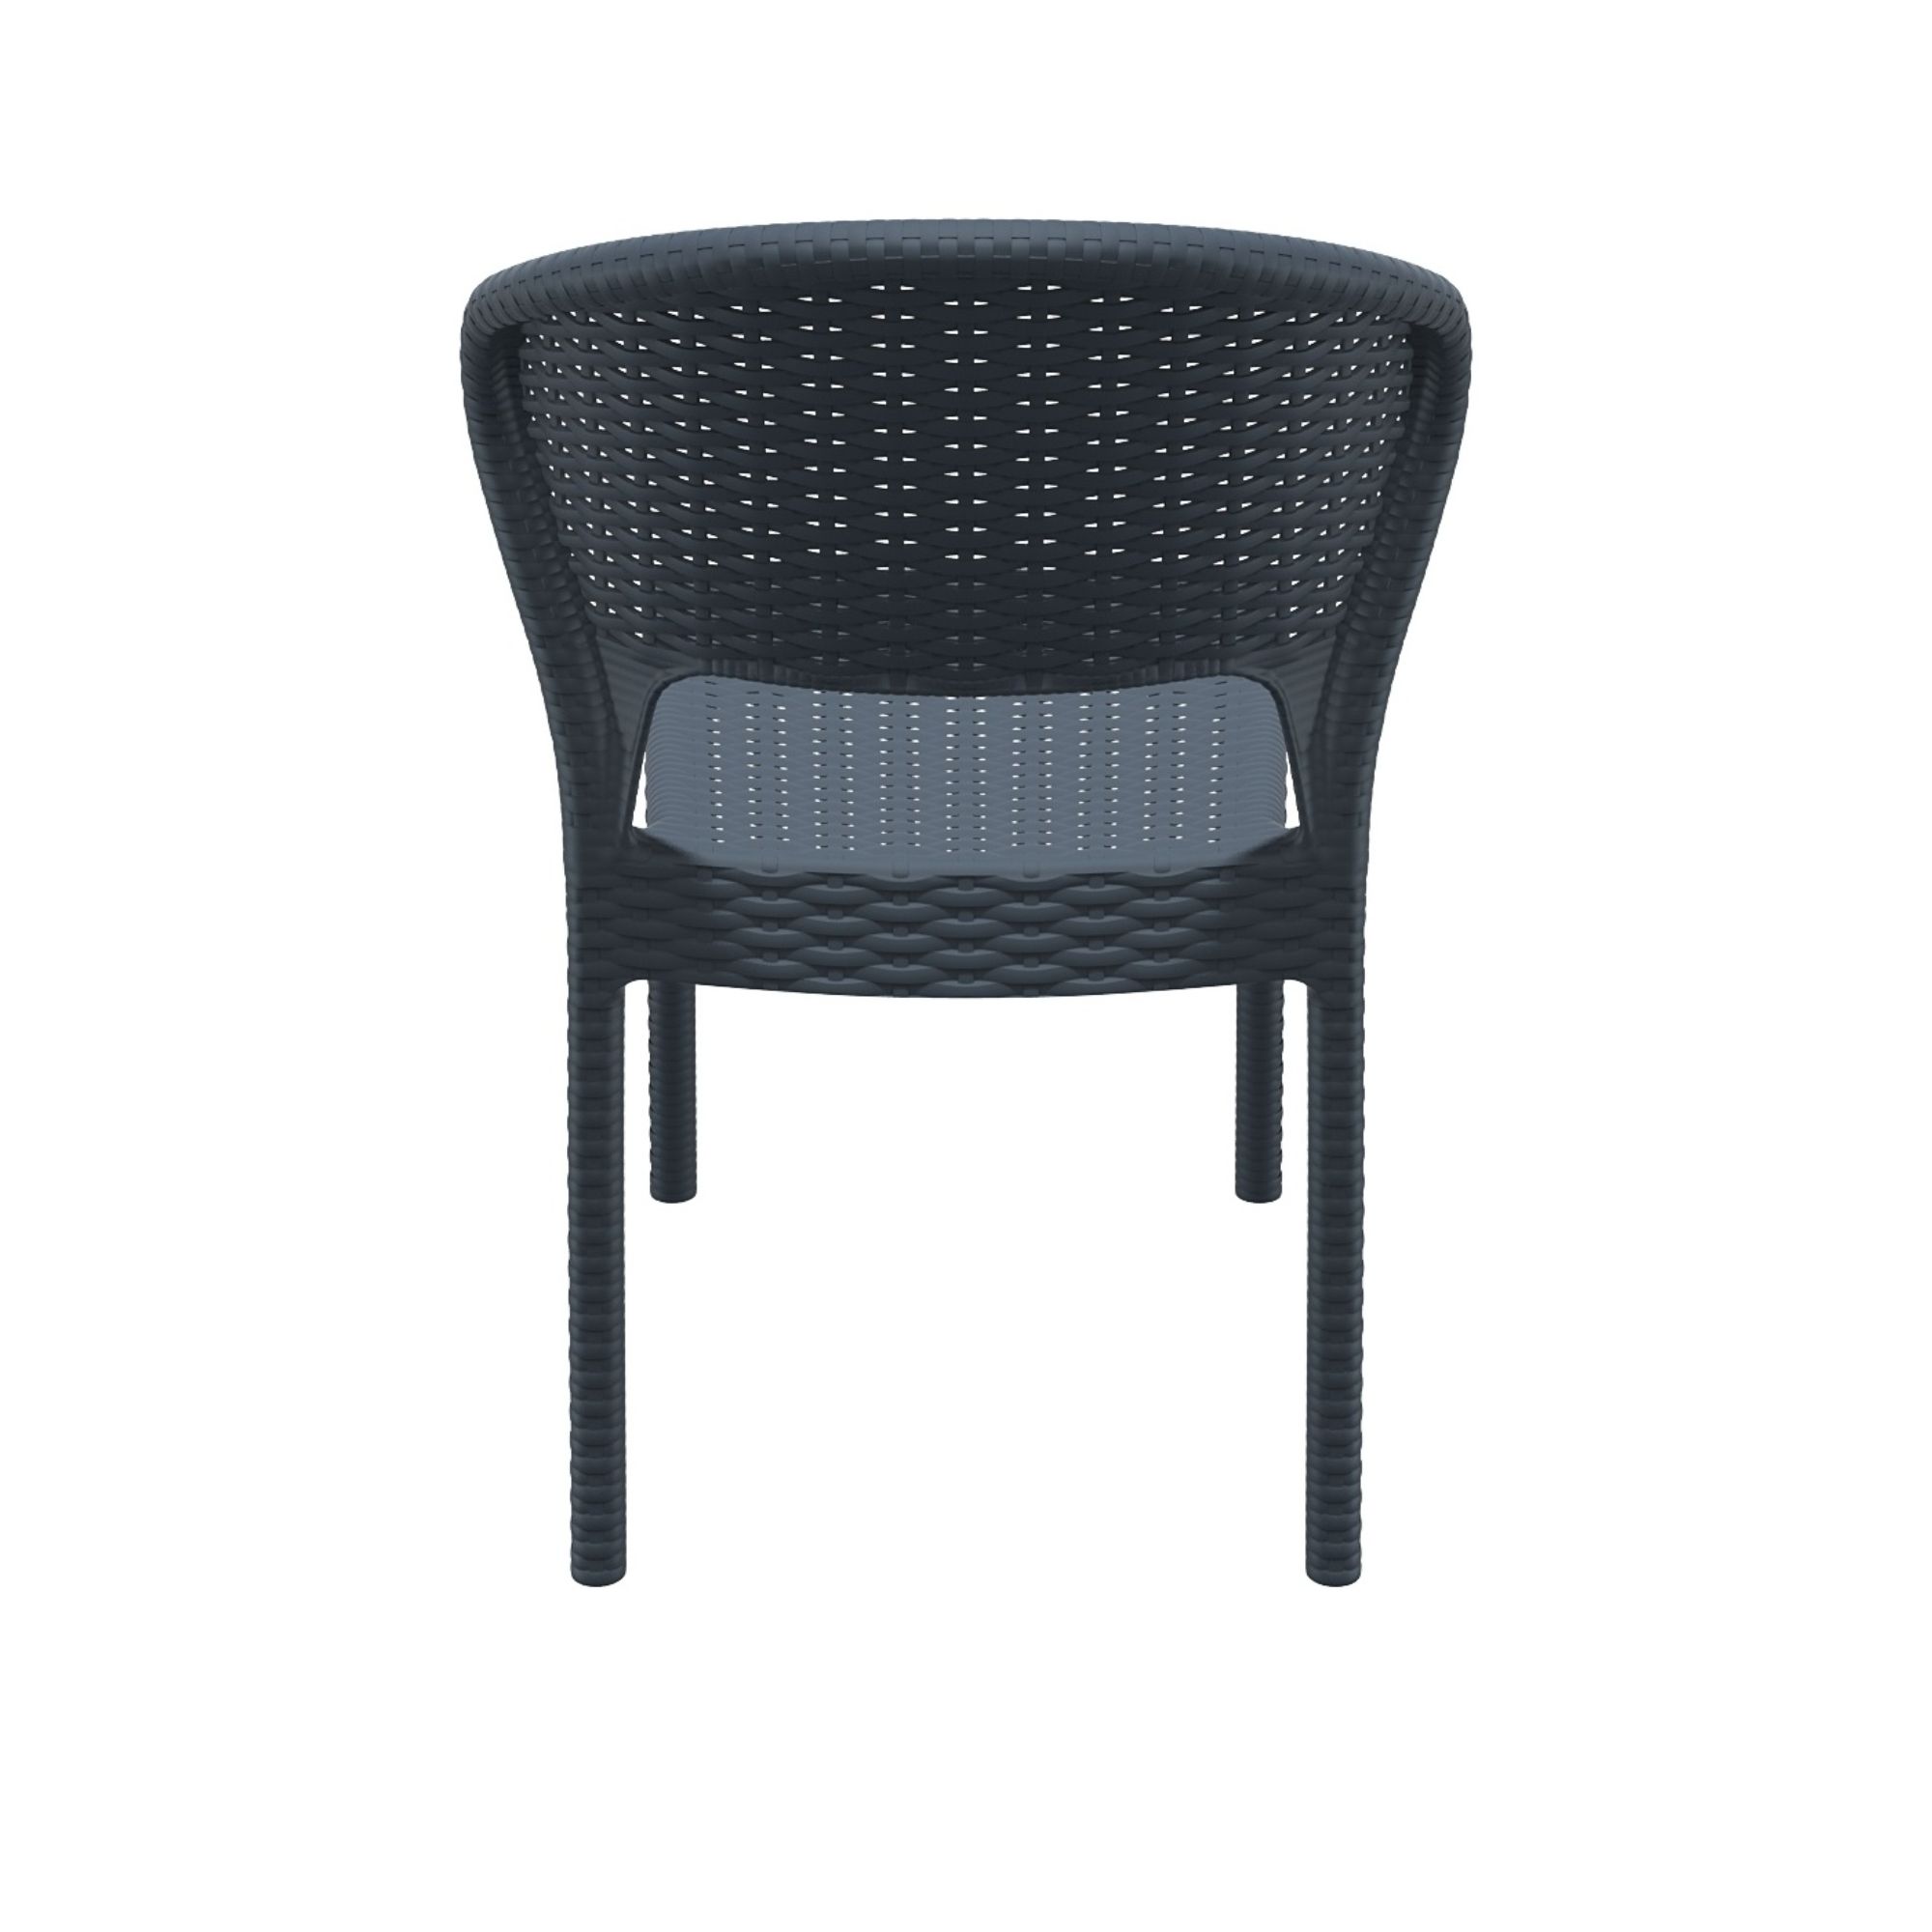 Compamia Dayton Resin Wickerlook Dining Chair 2 Pack Dark Gray - image 5 of 9